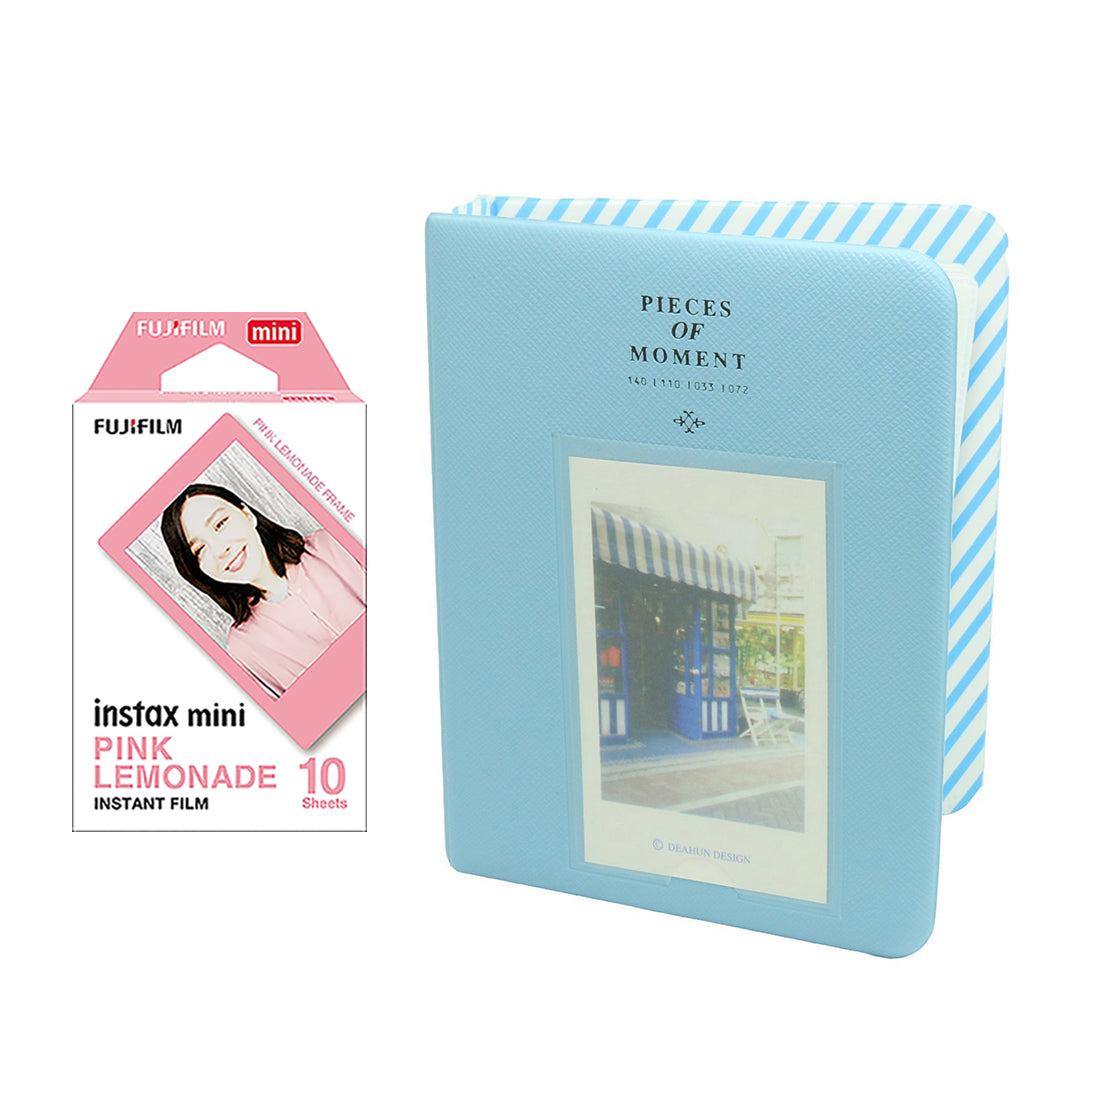 Fujifilm Instax Mini 10X1 pink lemonade Instant Film with Instax Time Photo Album 64 Sheets (Water Blue)